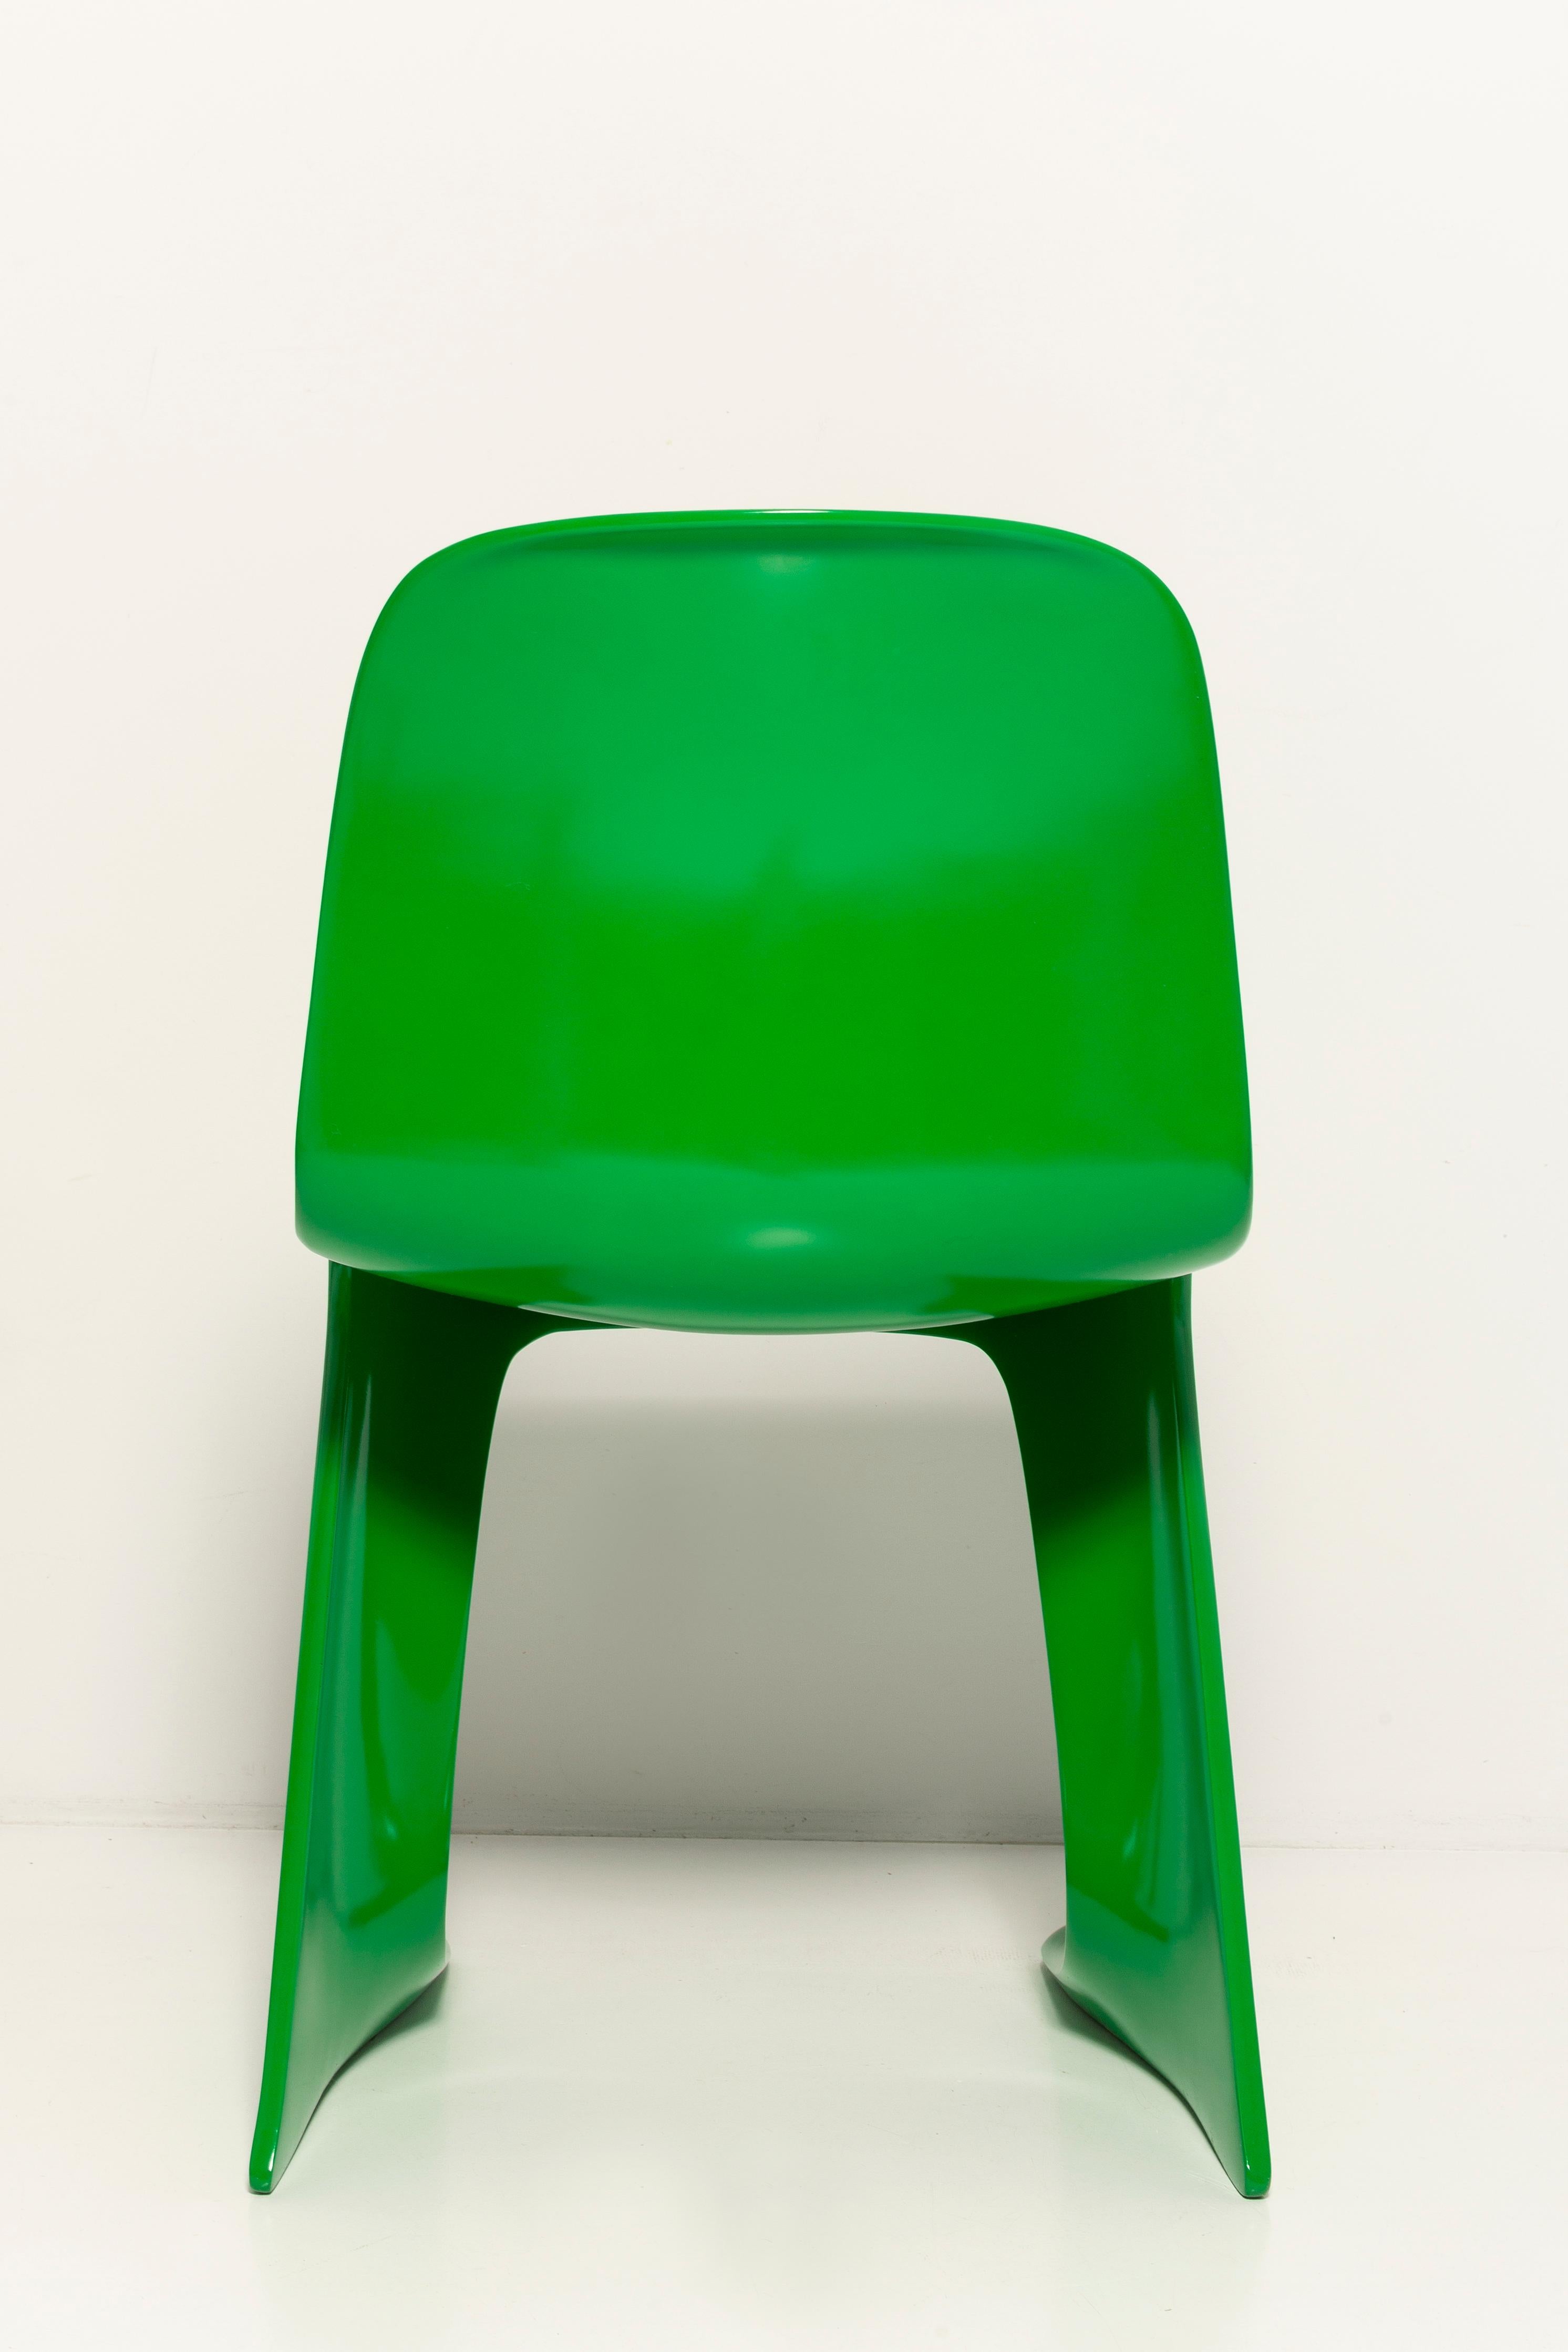 Set of Four Green Kangaroo Chairs Designed by Ernst Moeckl, Germany, 1960s For Sale 4